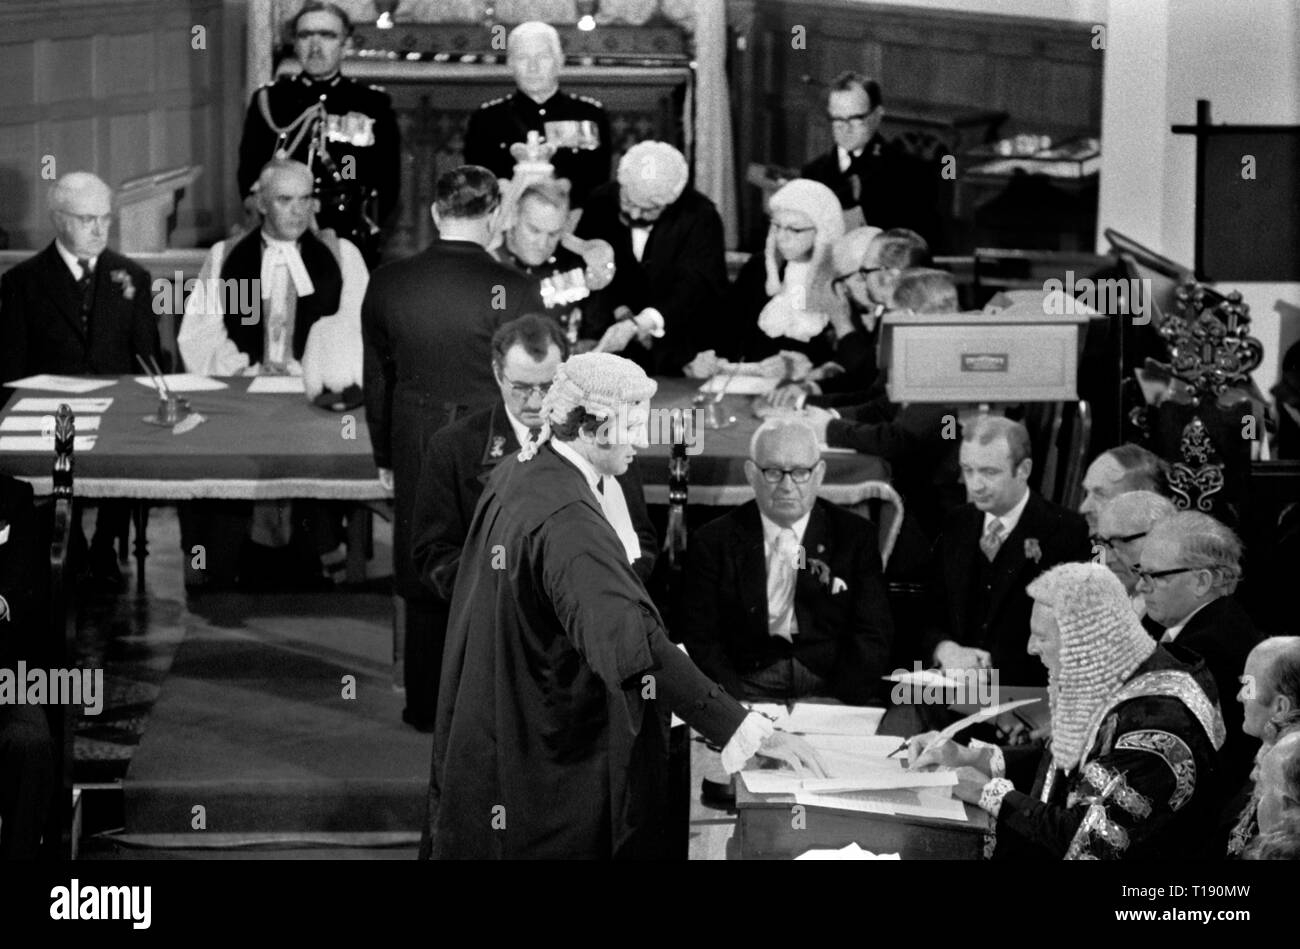 Isle of Man 1970s. The House of Keys Tynwald is the Manx Parliament sits in St Johns church after the Ceremony of Reading the Laws usually observed on 5 July. Church service taking place, before the Lieutenant Governor in long wig, will sign in recently passed laws. The Tynwald Court participates at the Tynwald Day Ceremony. 1978 HOMER SYKES Stock Photo